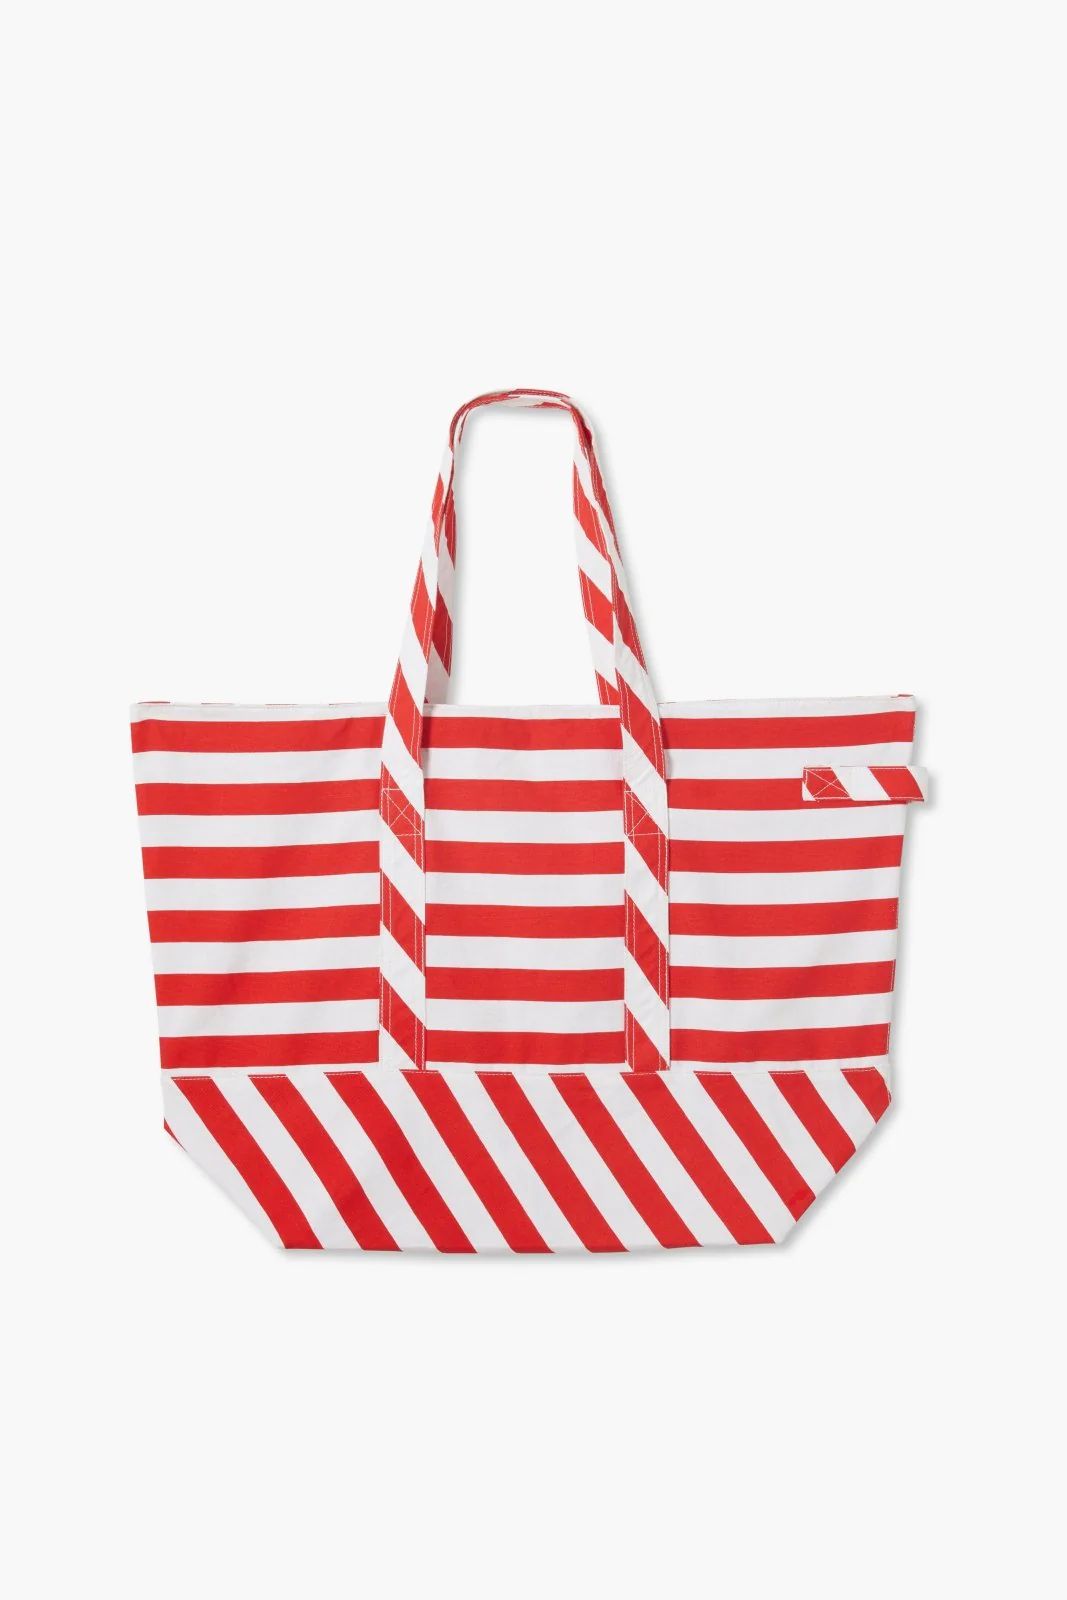 The Canvas Bag in Apple Red | Solid & Striped